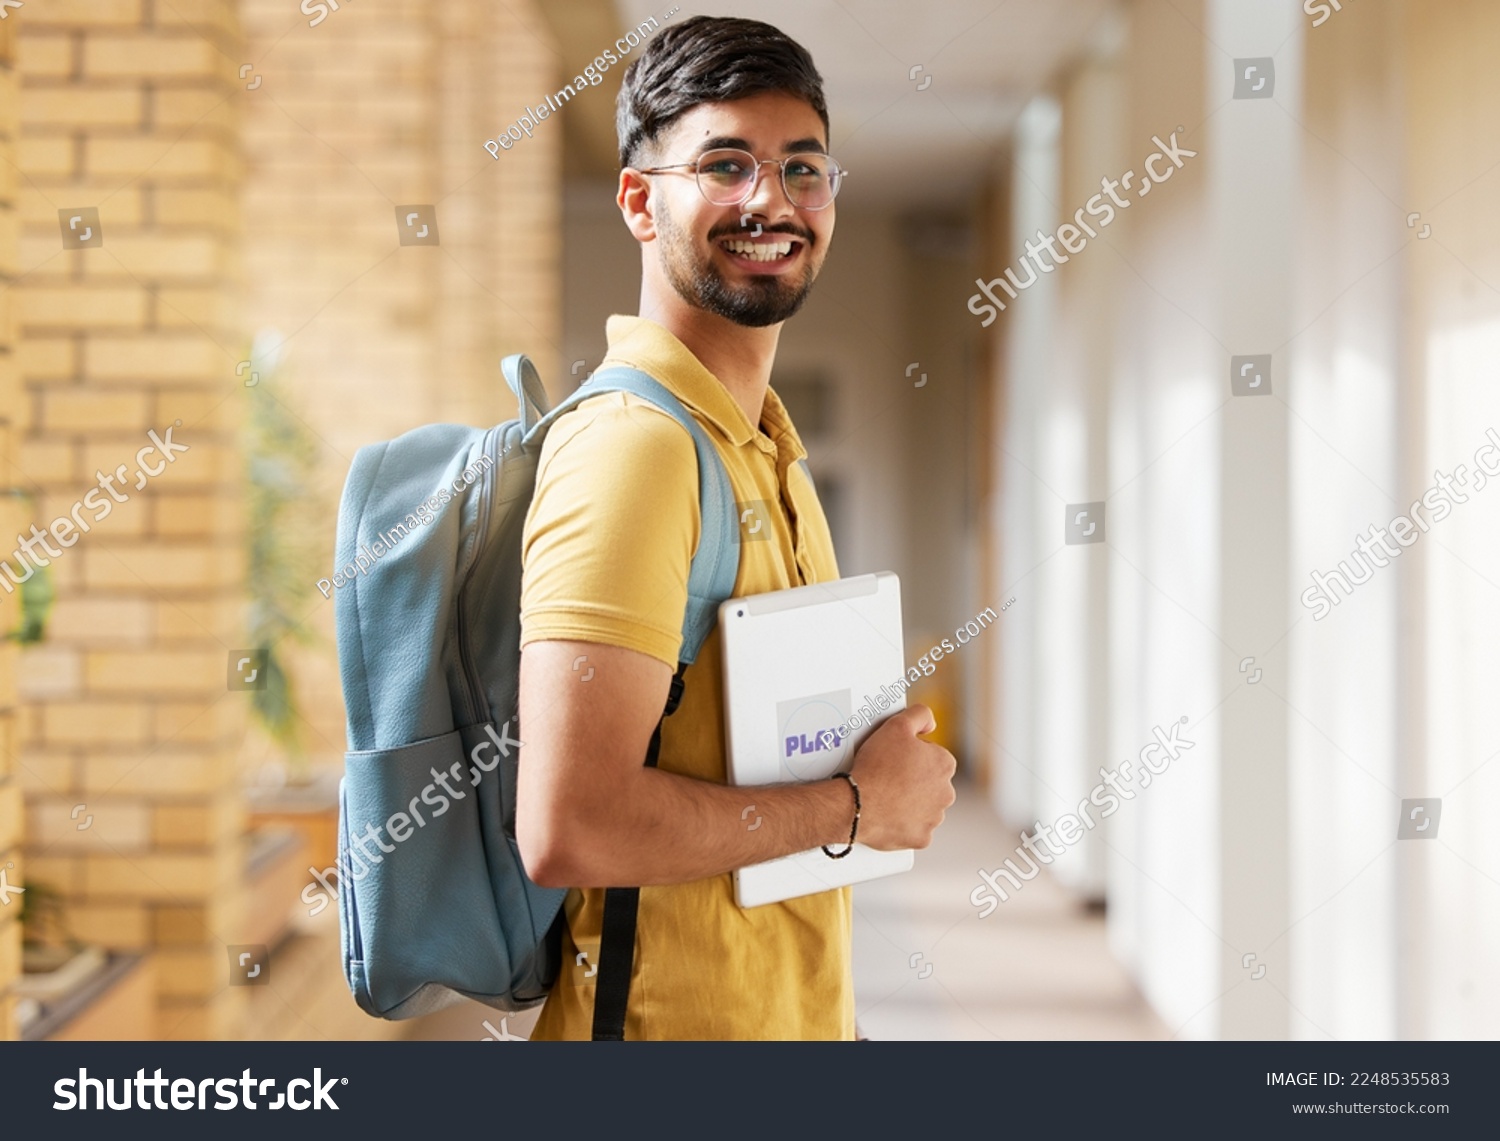 College student portrait, happy man and walking at university with a tablet and backpack to study and learn. Gen z male happy about education, learning and future after studying at school building #2248535583